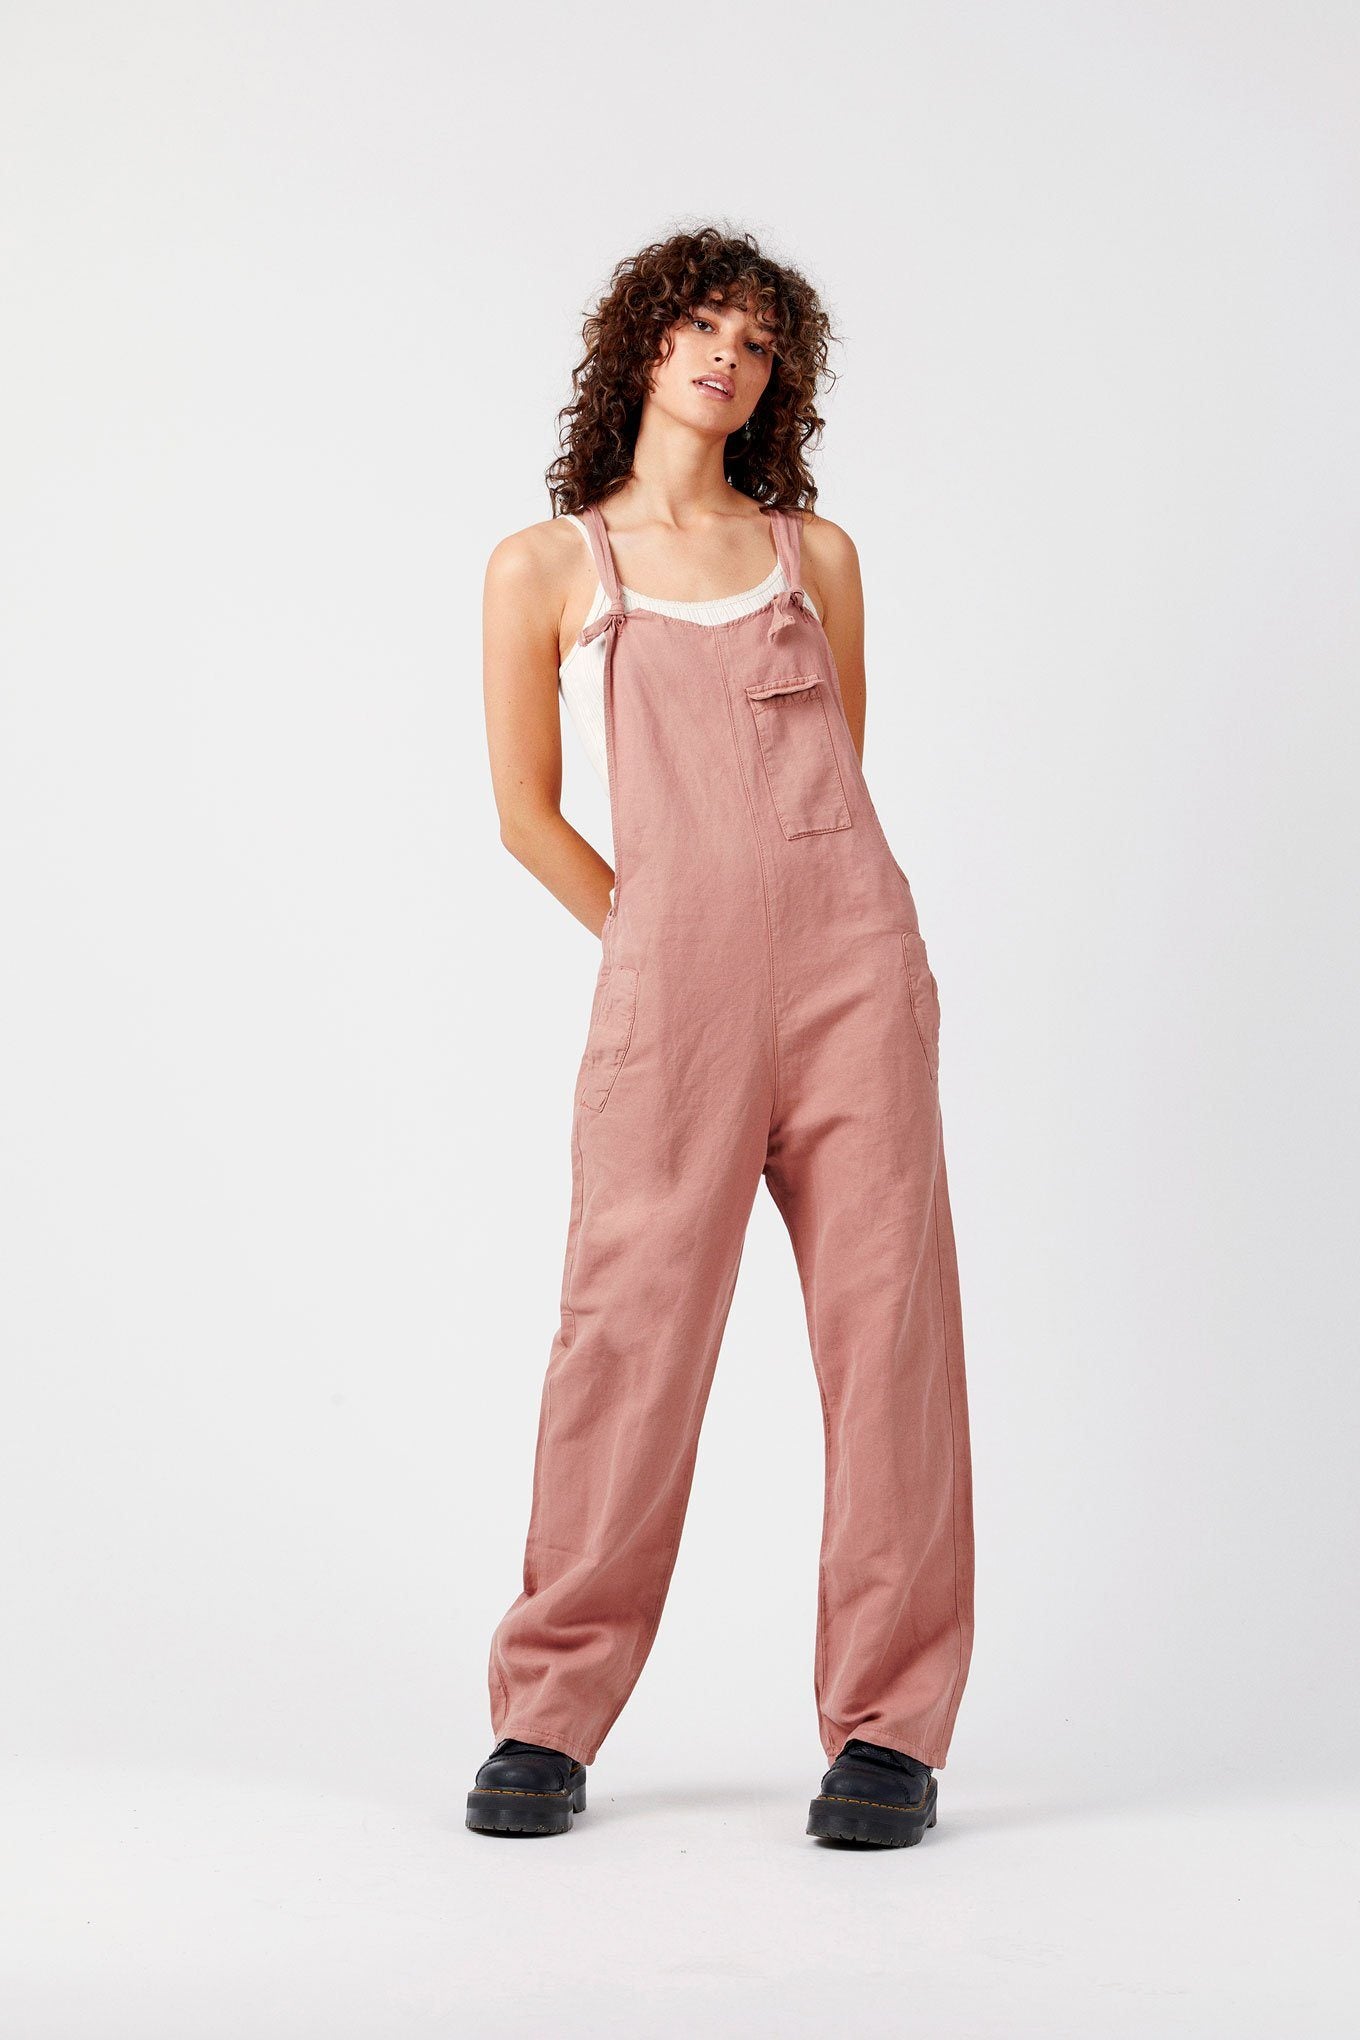 MARY-LOU Pink - GOTS Organic Cotton Dungarees by Flax & Loom, SIZE 1 / UK 8 / EUR 36